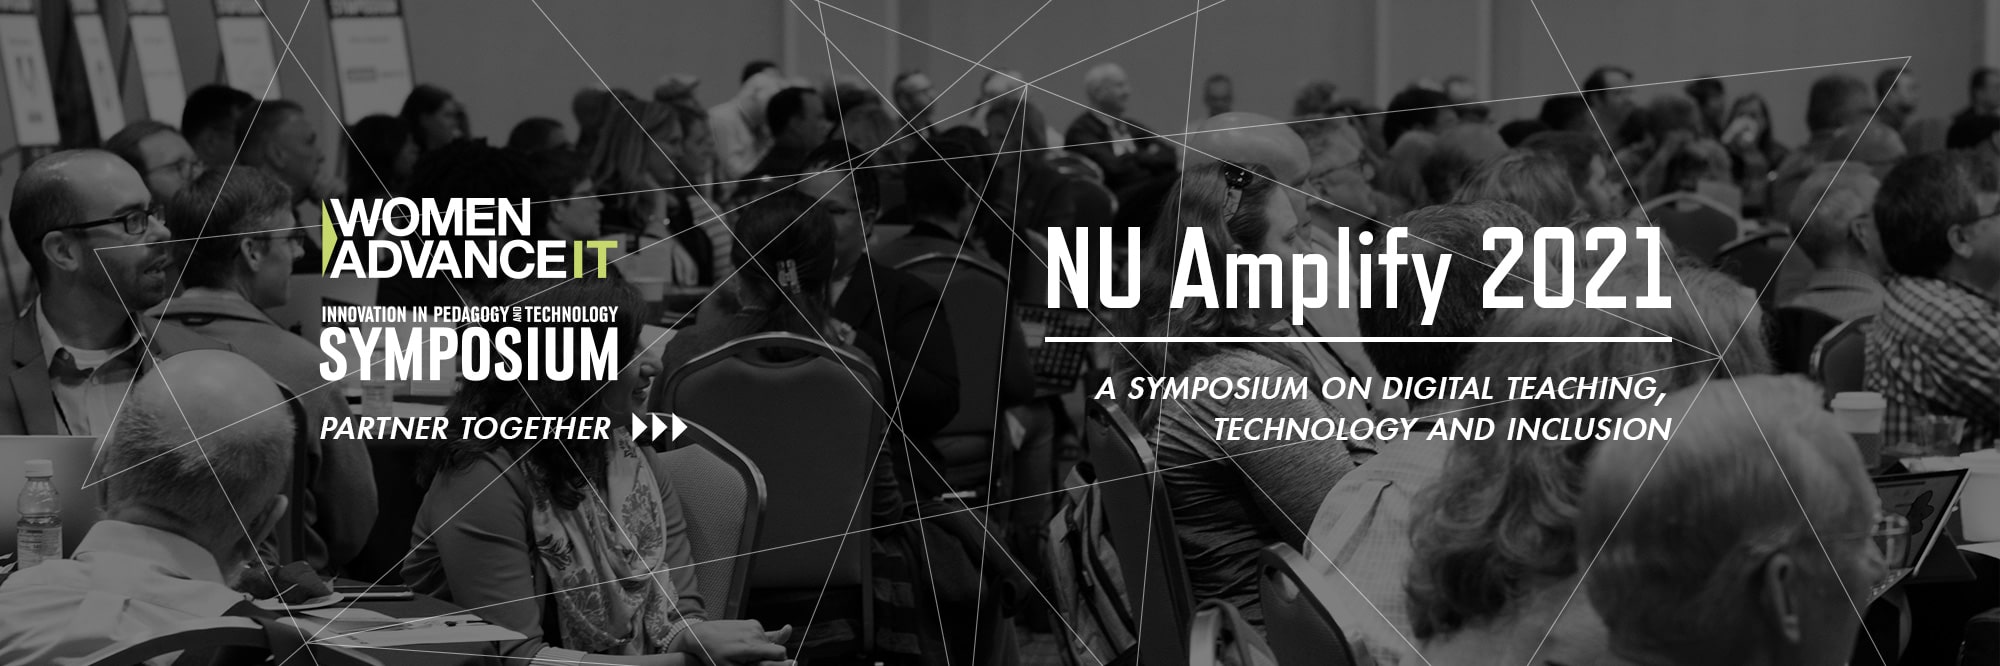 Women Advance IT and Innovation and Pedagogy & Technology Partner Together for NU Amplify 2021: A Symposium on Digital Teaching, Technology and Inclusion